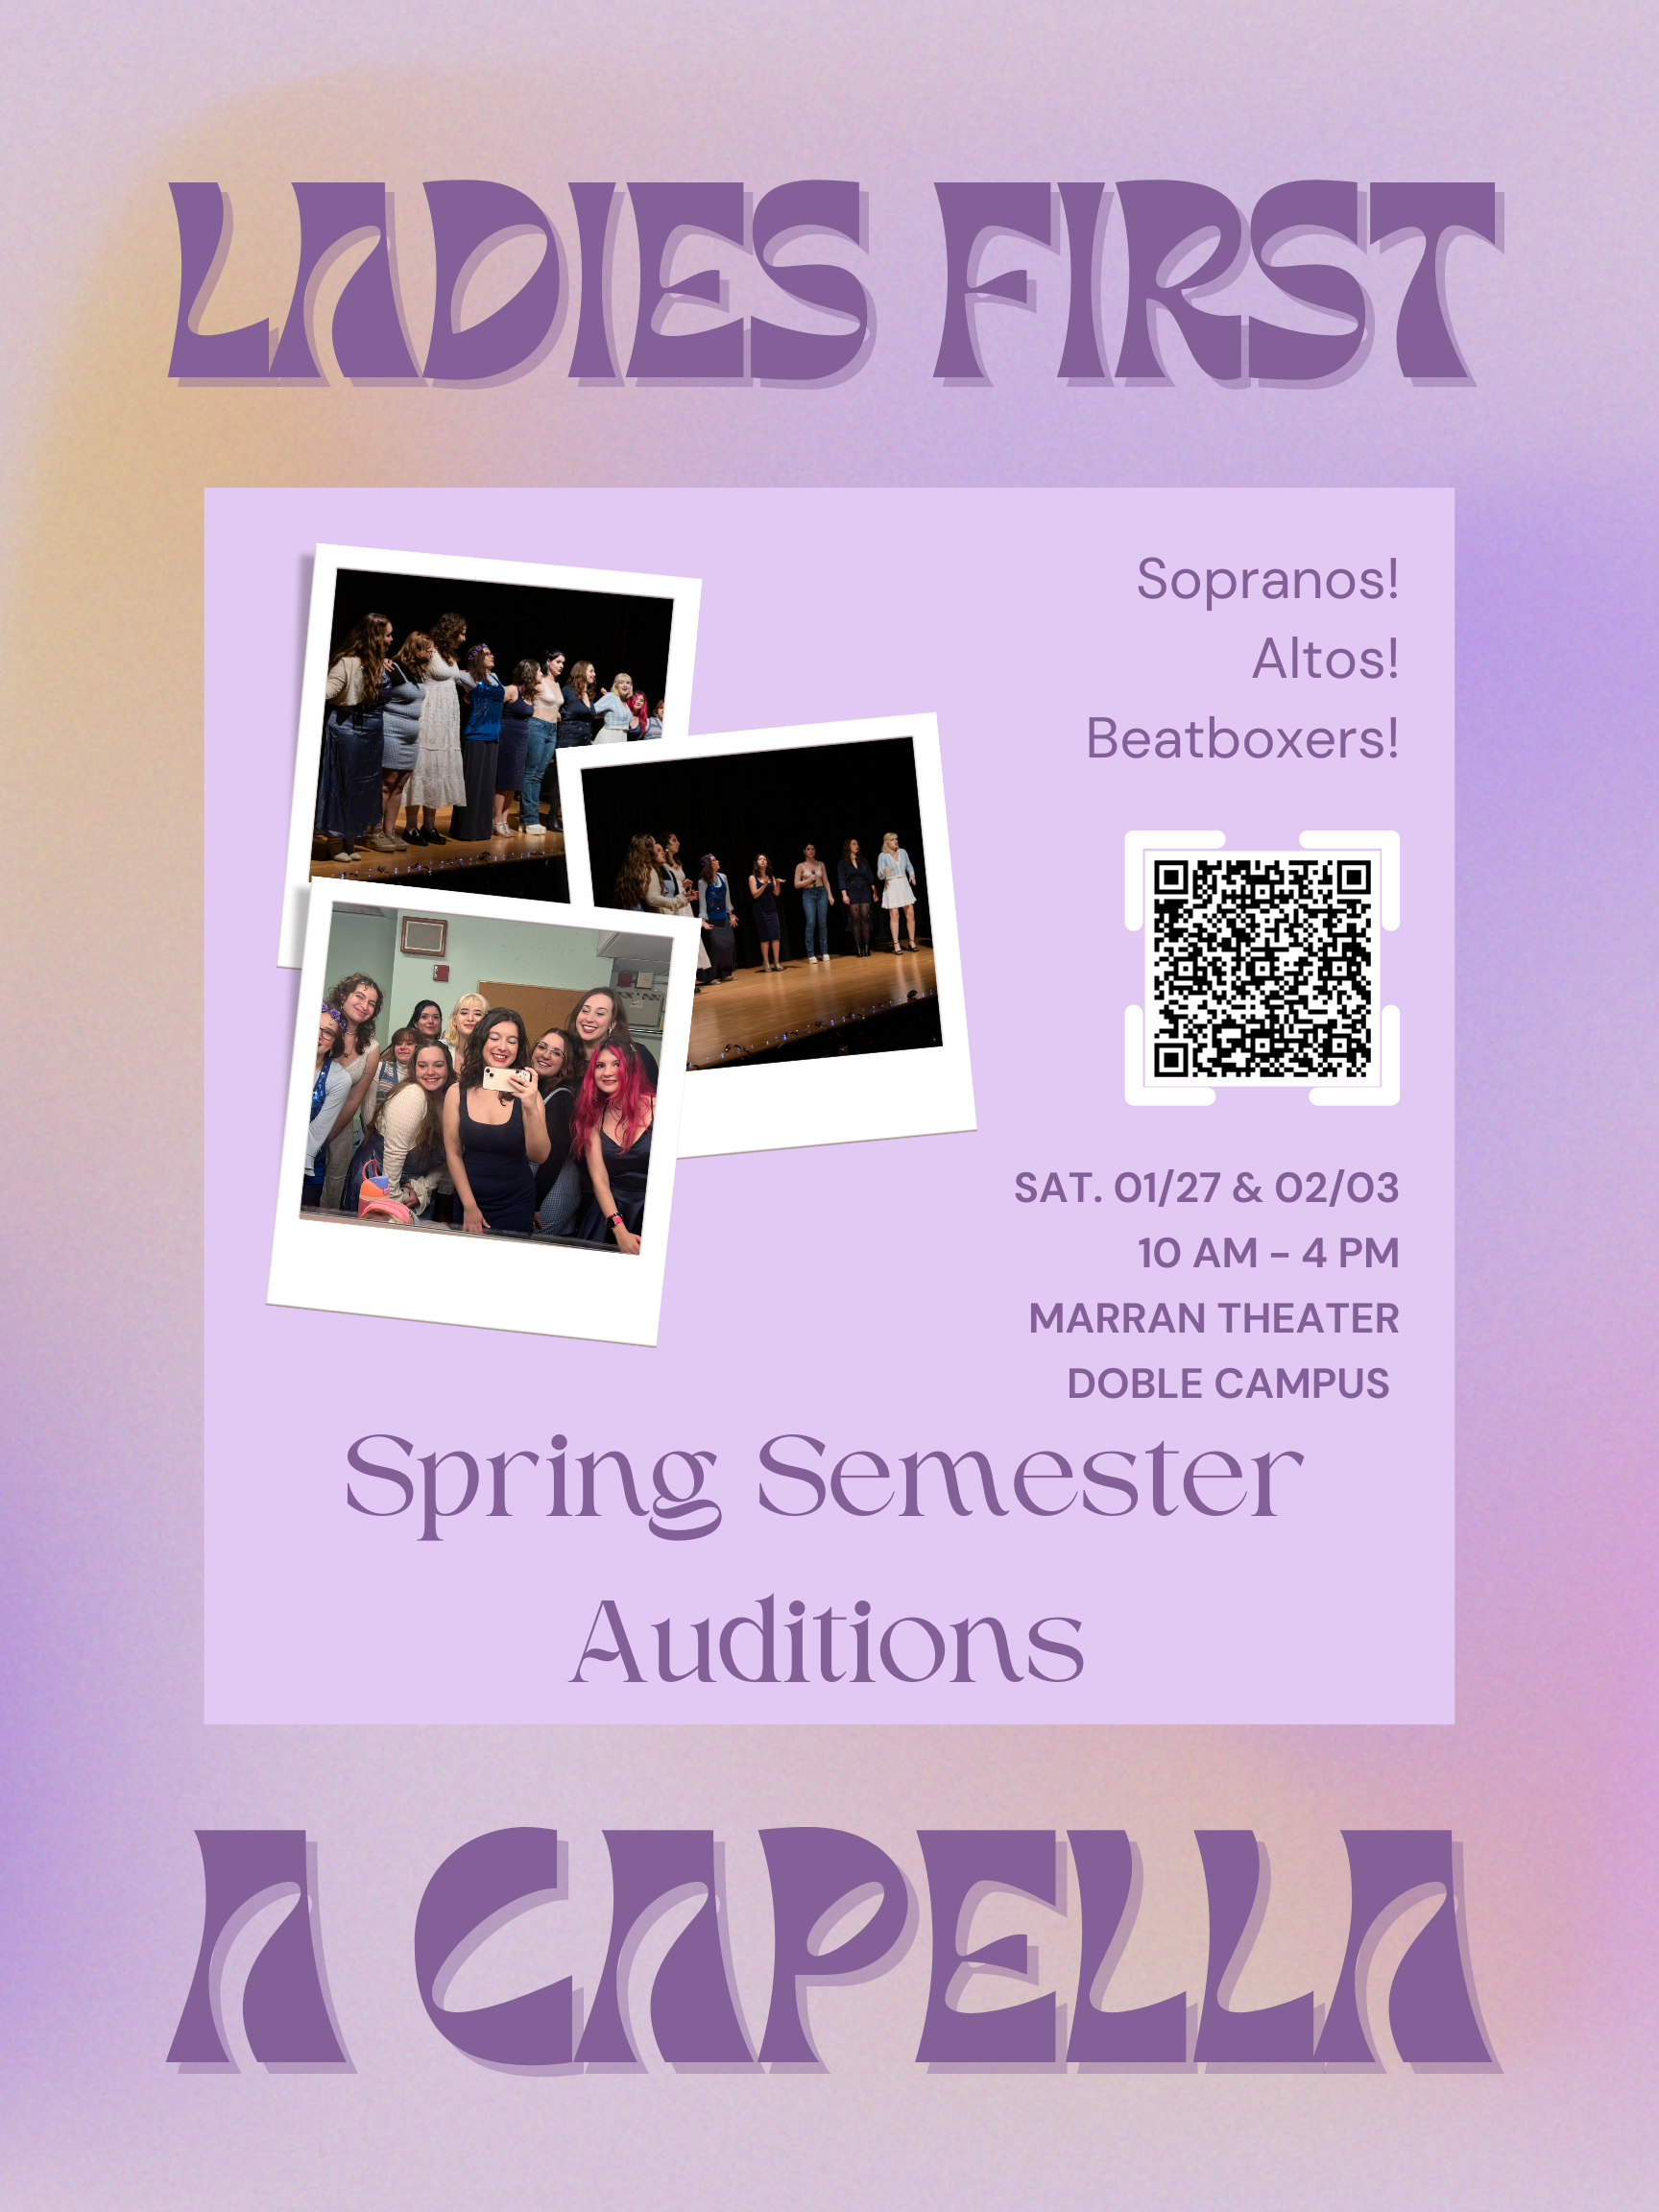 Ladies First A Capella auditions